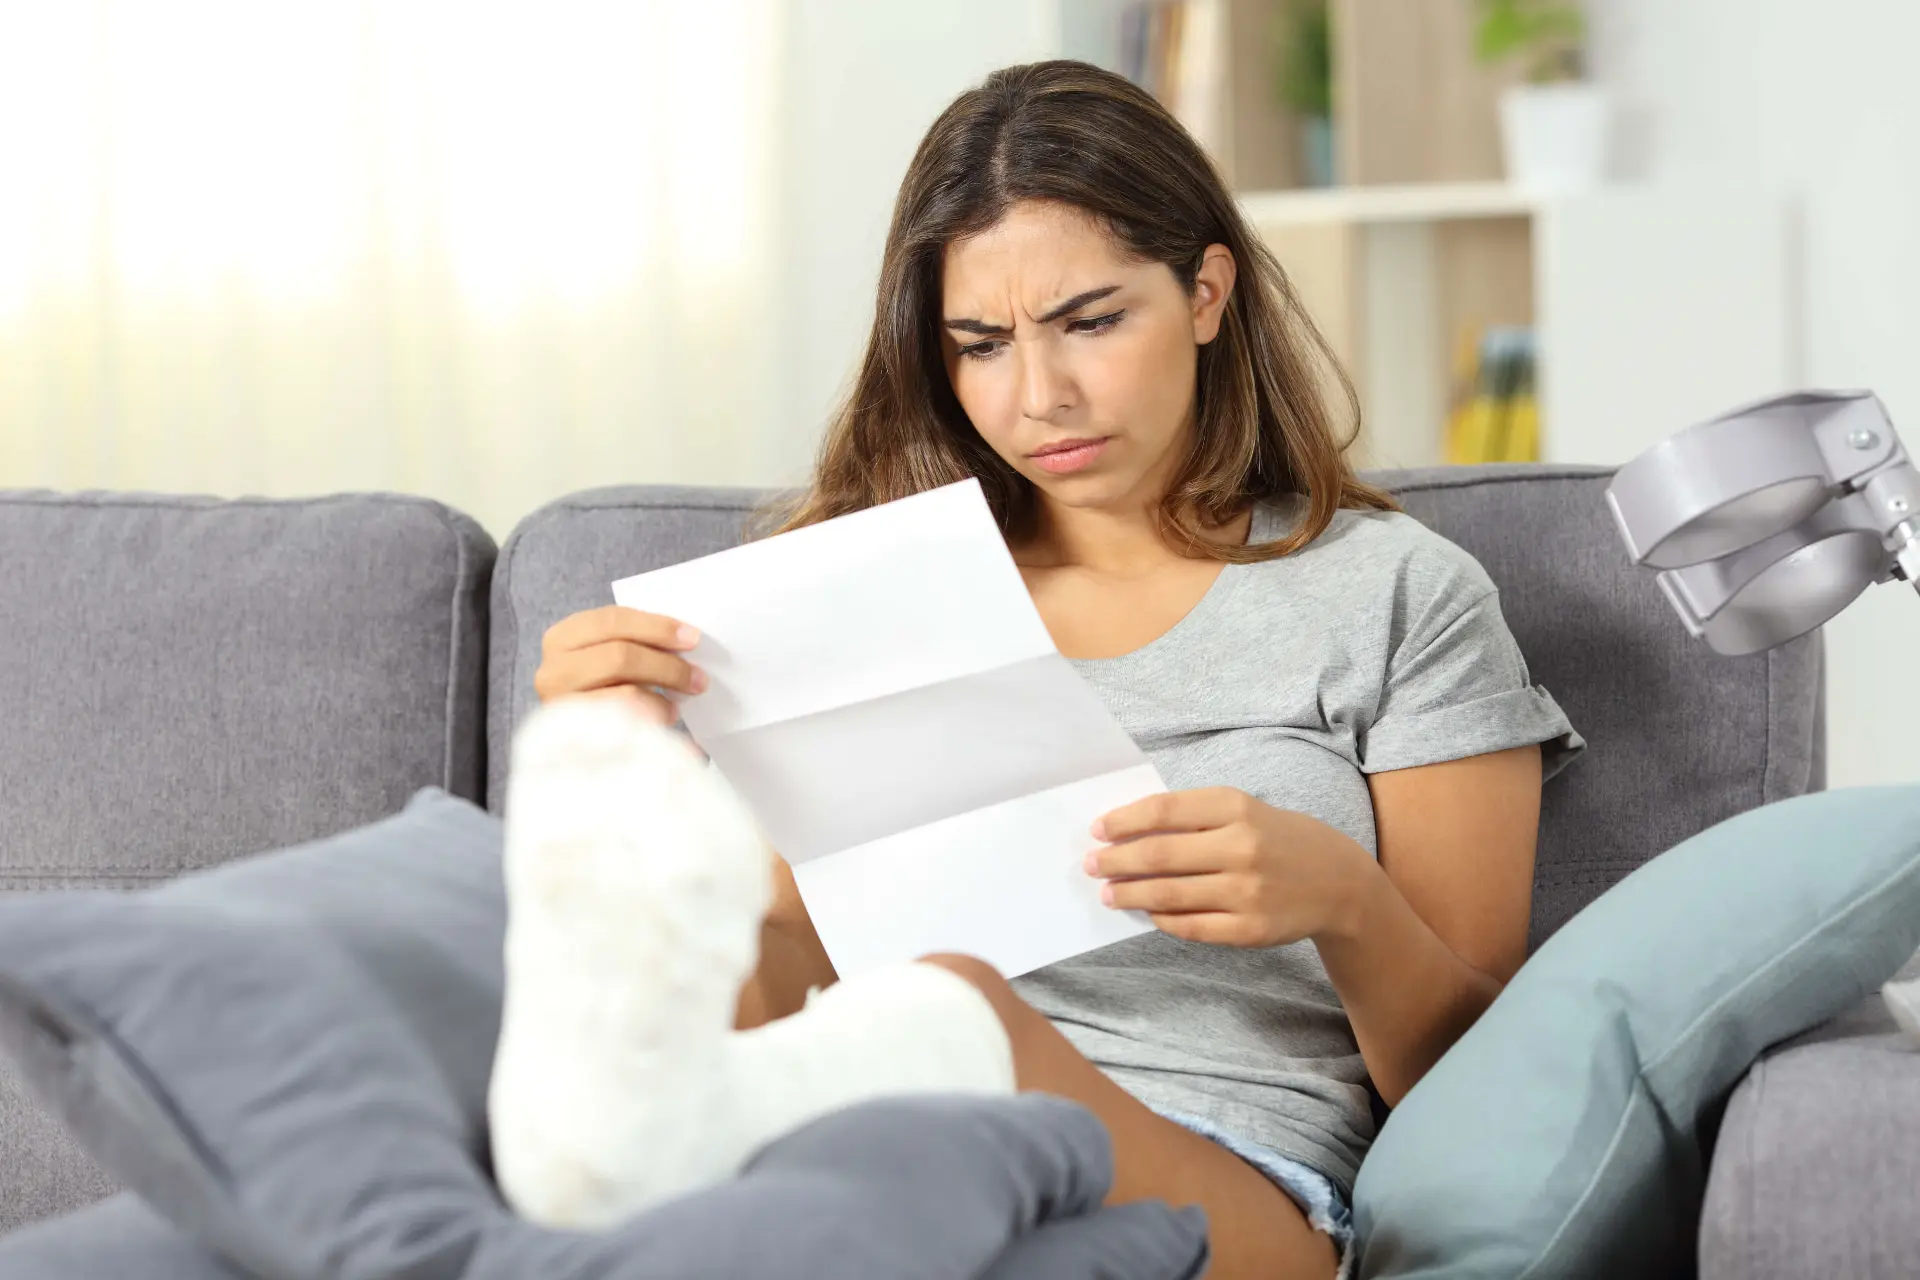 a woman in a grey t shirt reads a document while sitting on her couch with an injured and bandaged foot propped up on a pillow